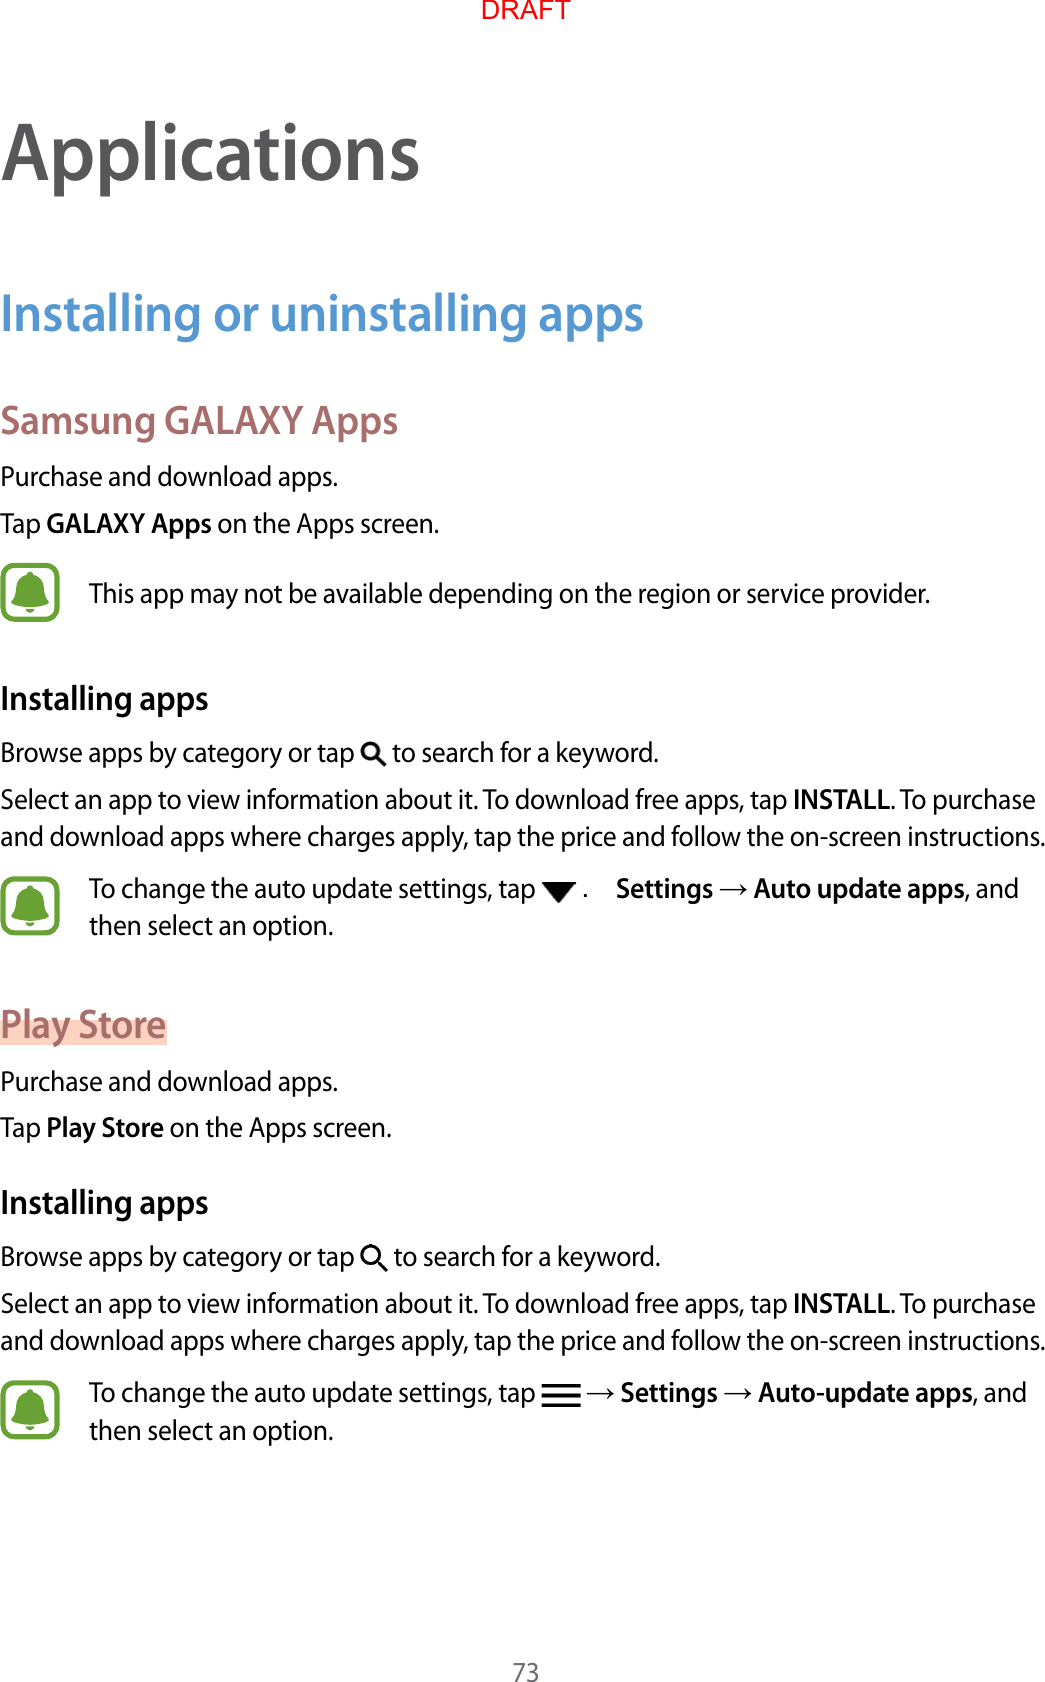 73ApplicationsInstalling or uninstalling appsSamsung GALAXY AppsPurchase and download apps.Tap GALAXY Apps on the Apps screen.This app may not be available depending on the region or service provider.Installing appsBrowse apps by category or tap   to search for a keyword.Select an app to view information about it. To download free apps, tap INSTALL. To purchase and download apps where charges apply, tap the price and follow the on-screen instructions.To change the auto update settings, tap   . Settings  Auto update apps, and then select an option.Play StorePurchase and download apps.Tap Play Store on the Apps screen.Installing appsBrowse apps by category or tap   to search for a keyword.Select an app to view information about it. To download free apps, tap INSTALL. To purchase and download apps where charges apply, tap the price and follow the on-screen instructions.To change the auto update settings, tap    Settings  Auto-update apps, and then select an option.DRAFT